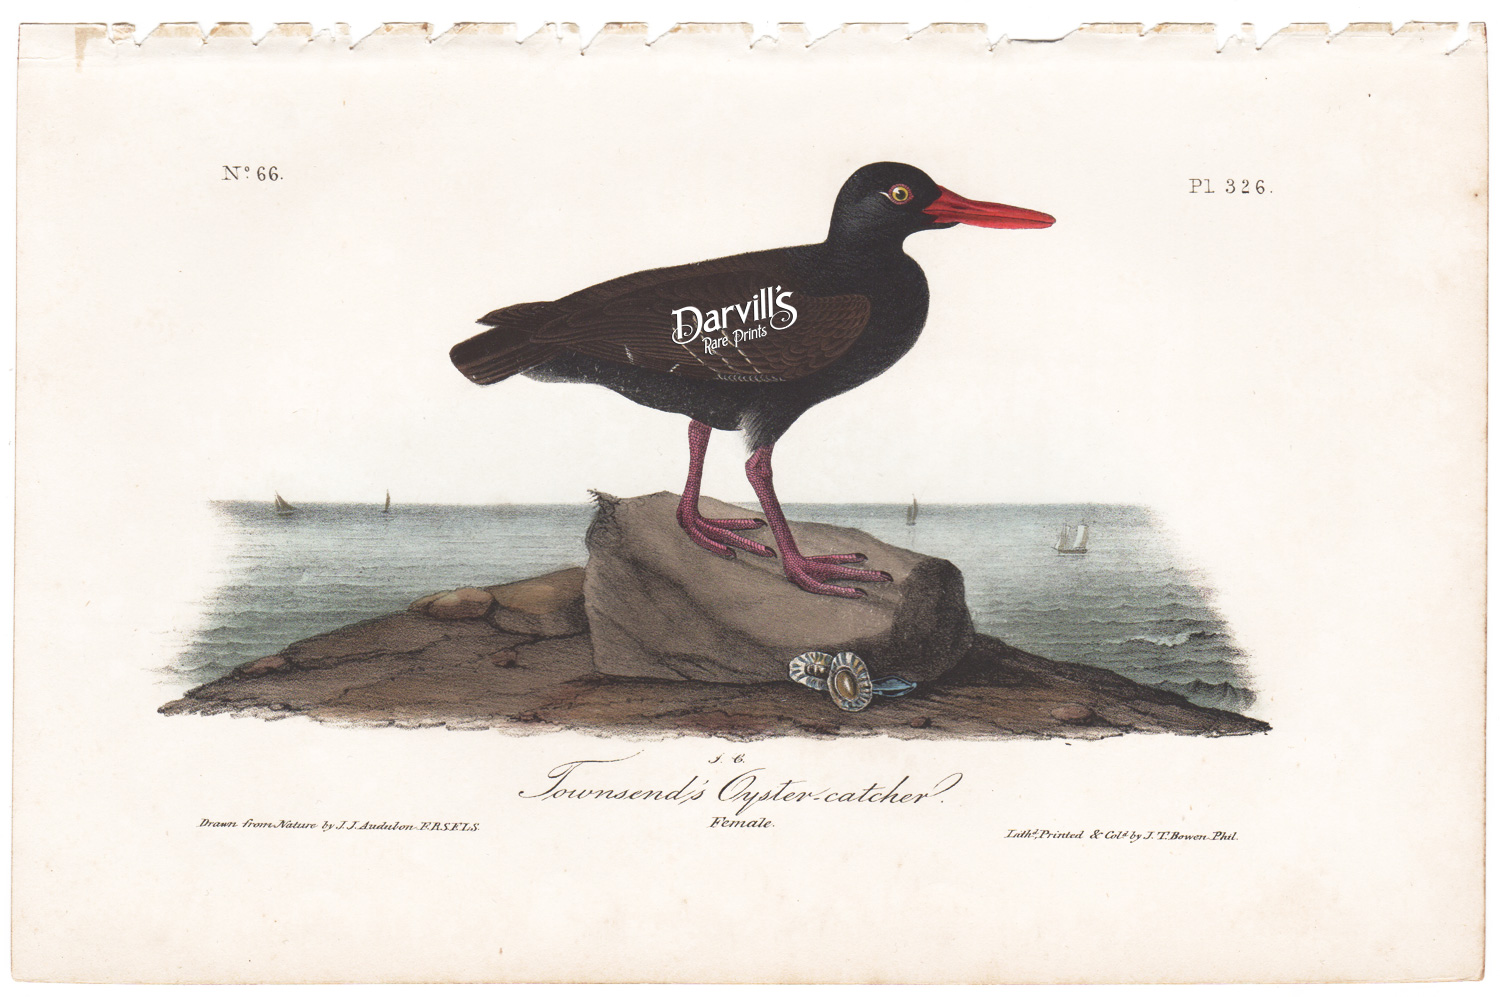 Townsend's Oyster-Catcher Plate 326